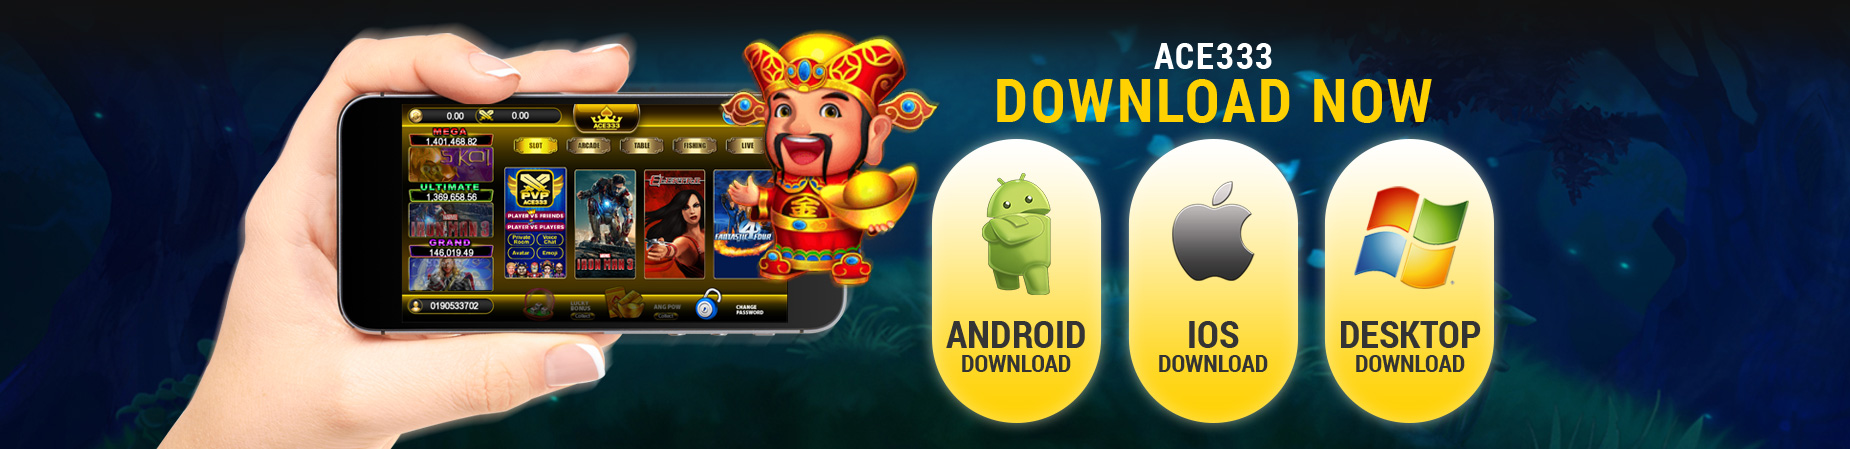 download game mesin slot online android, ios, windows, mac os ace333